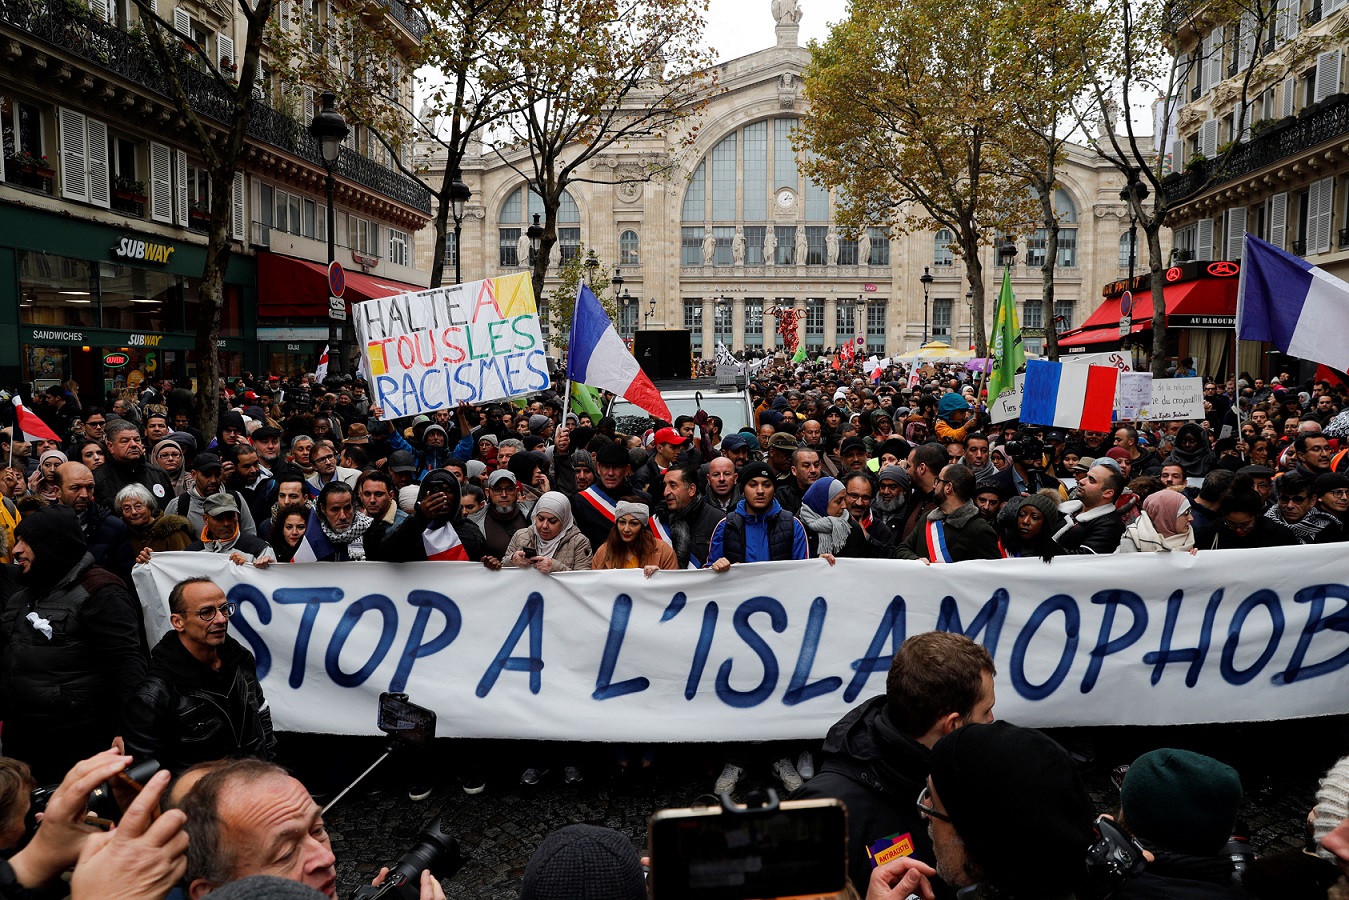 A demonstration against Islamophobia in Paris on 10 November 2019 (AFP)